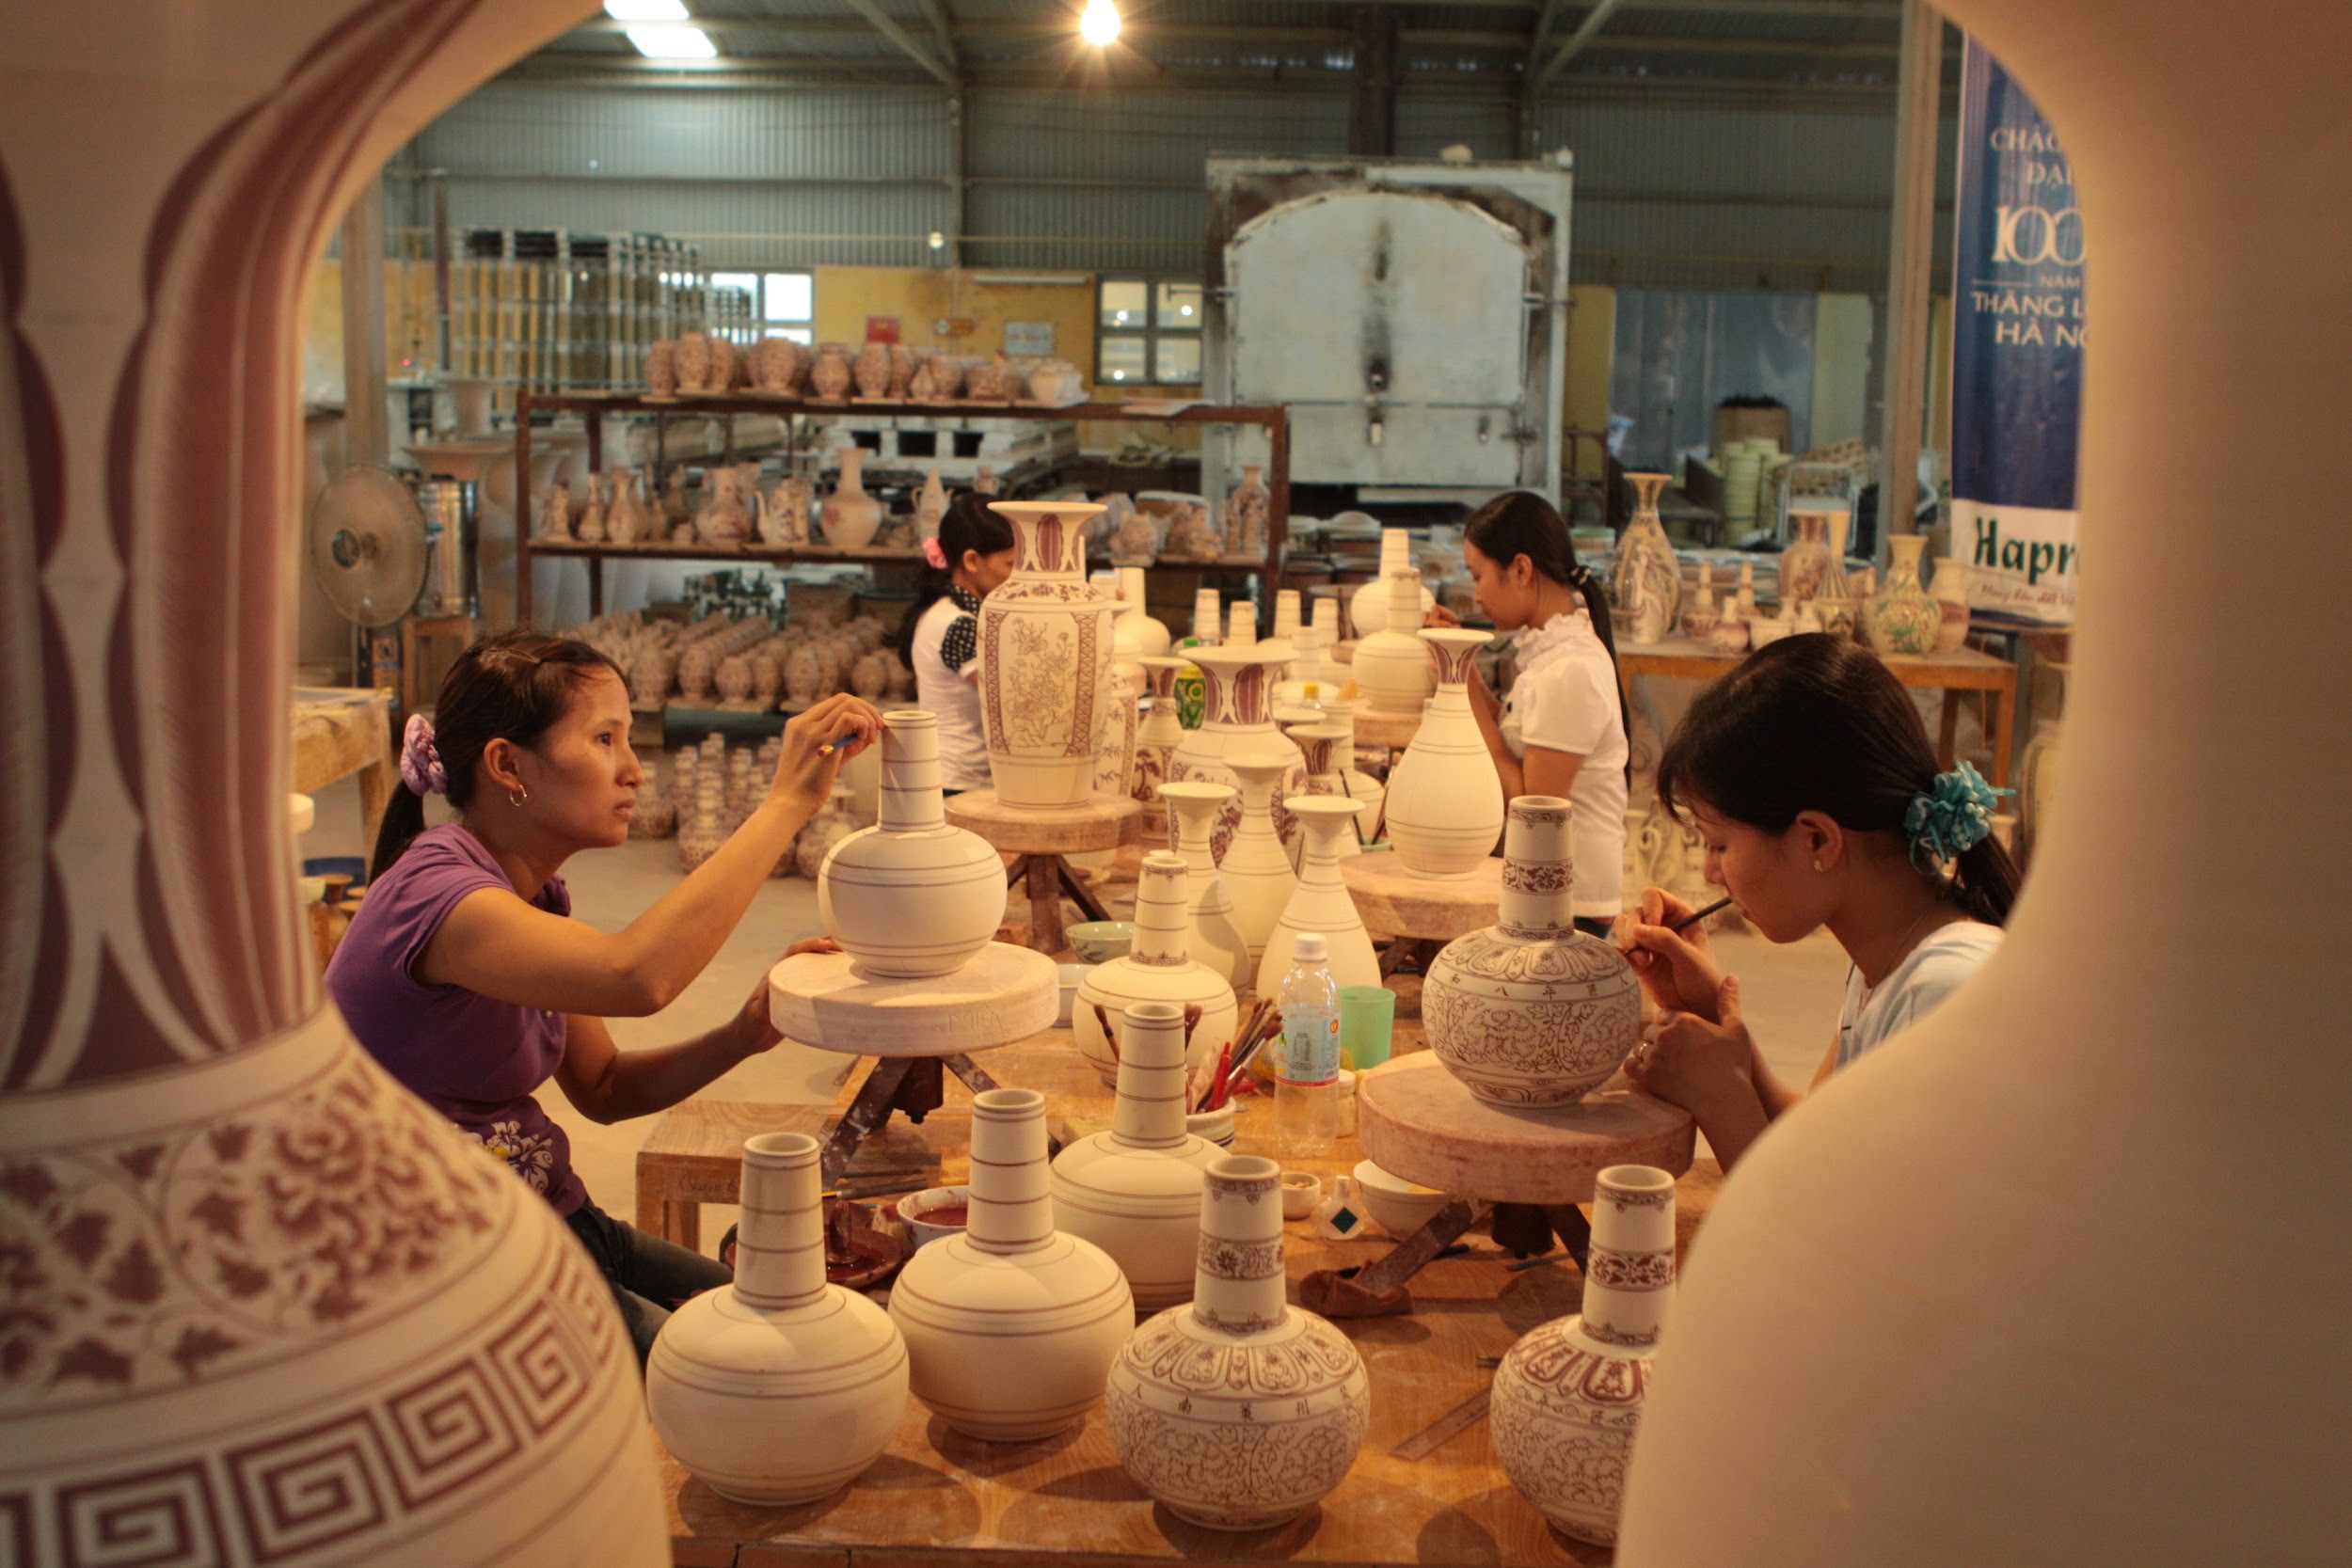 Why not try making pottery in Hanoi?